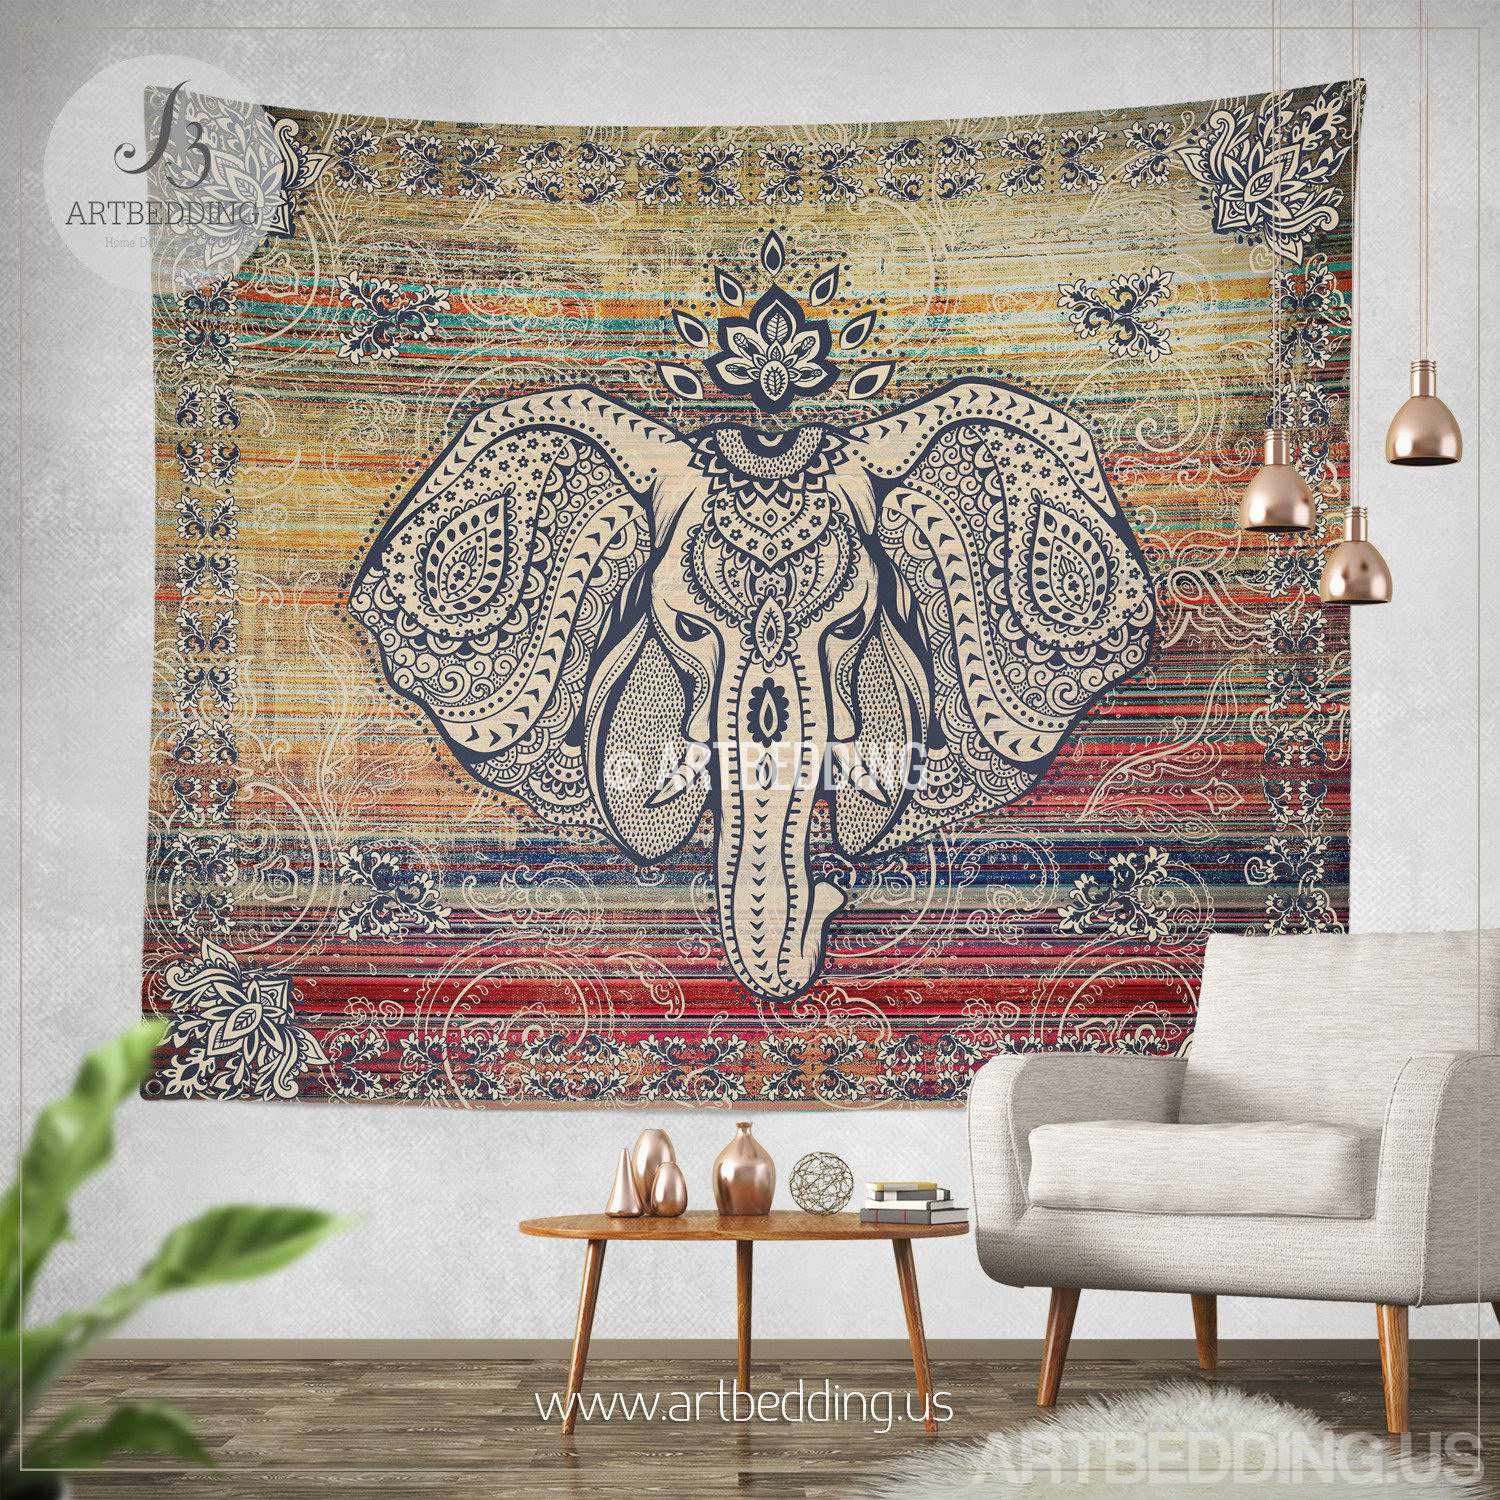 Ethno Ganesh Wall Tapestry Elephant Head Wall Tapestry Hippie Indie Artbedding